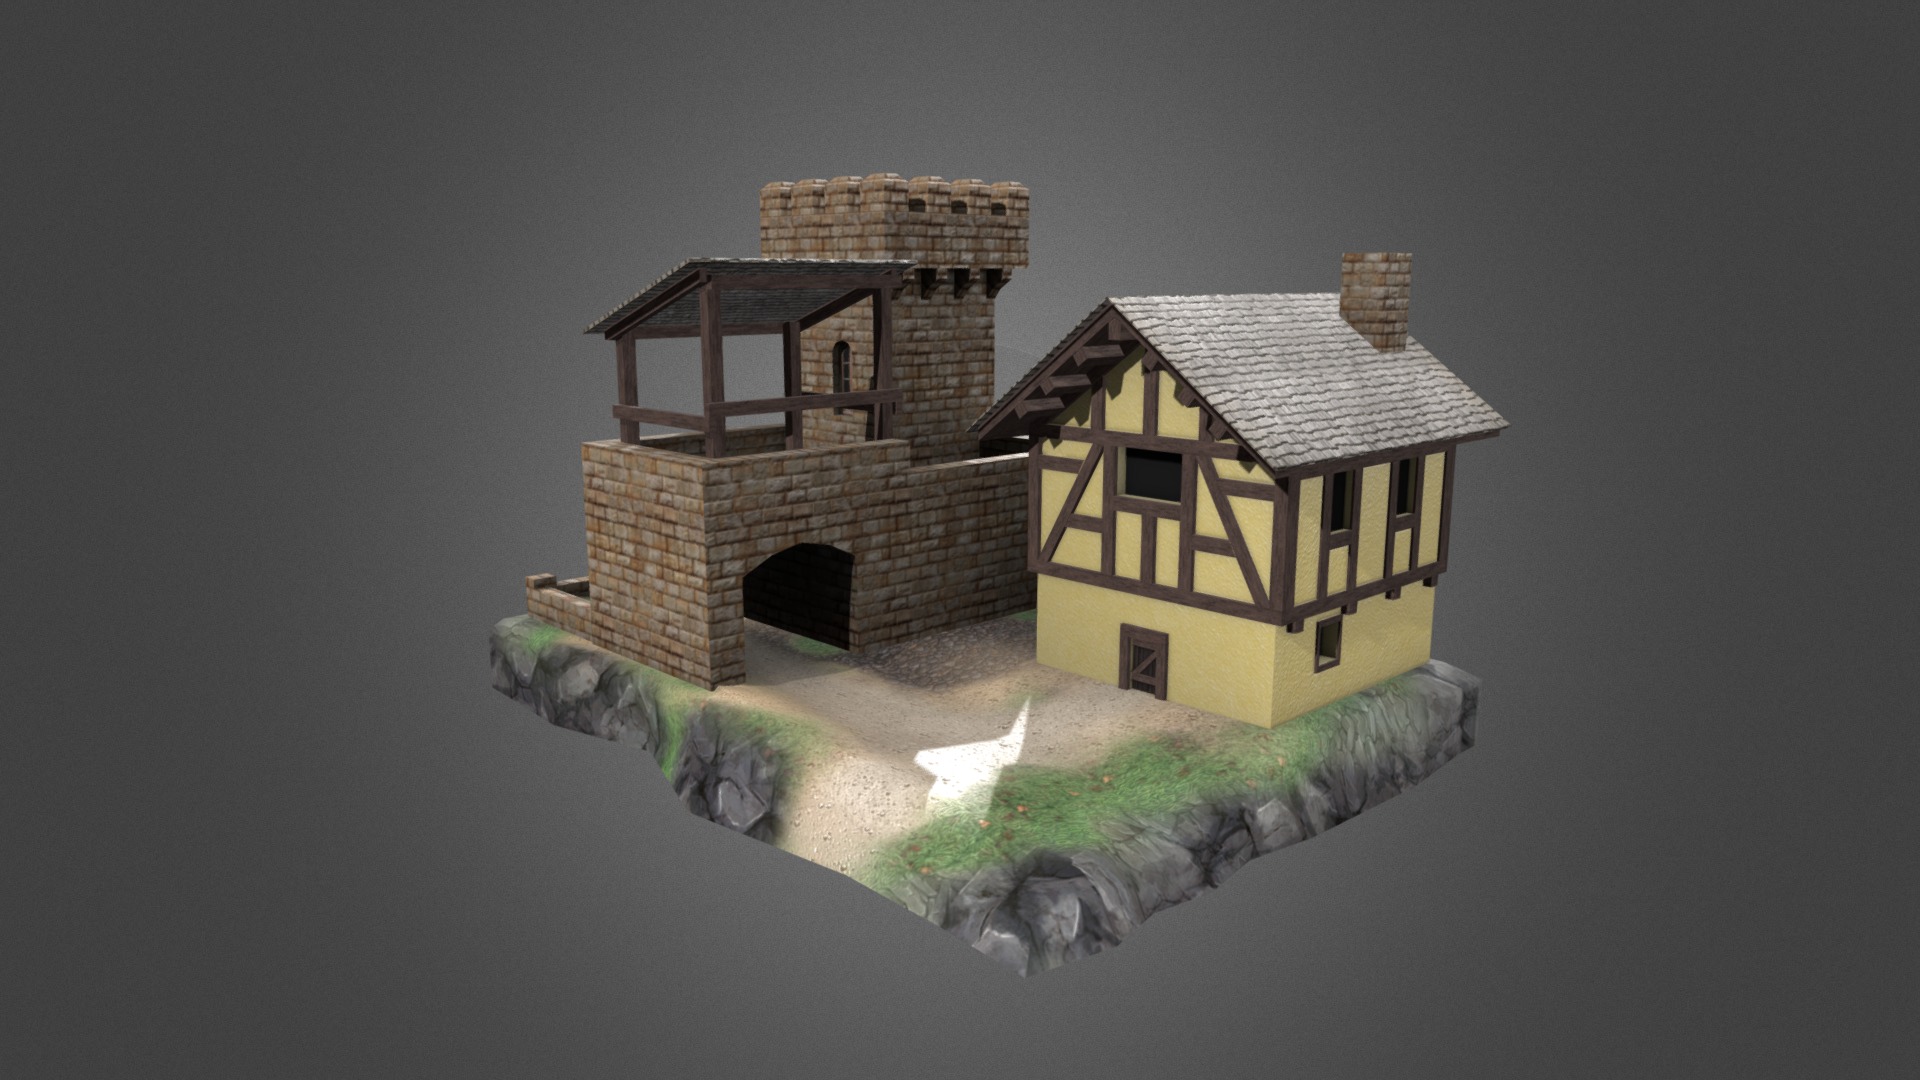 Low poly game-ready 3d model of a Medieval Townhouse

Download: http://gamedev.cgduck.pro - Medieval Townhouse - 3D model by CG Duck (@cg_duck) 3d model